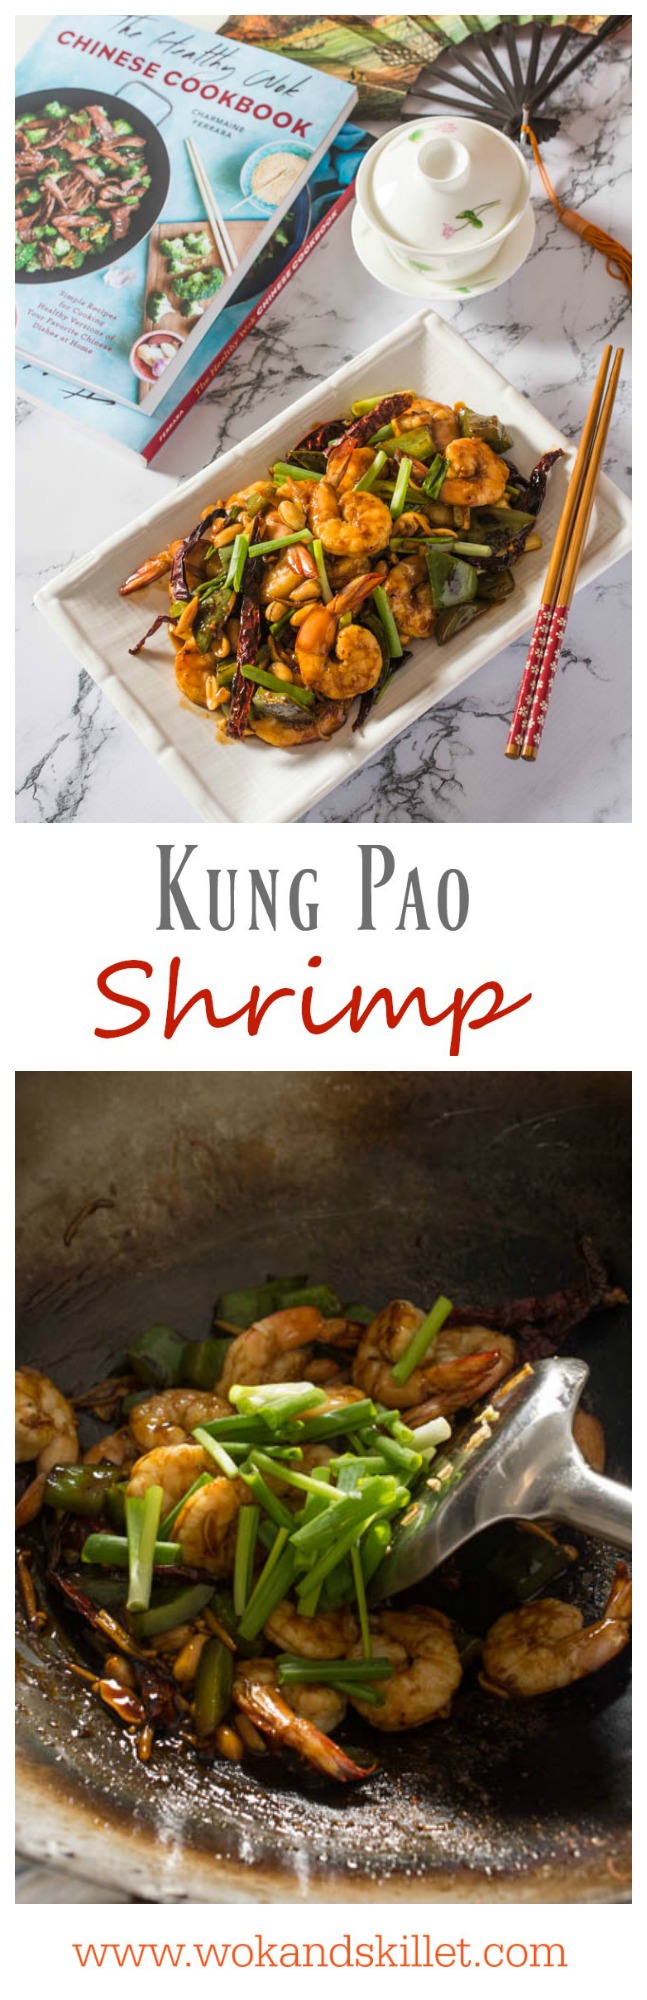 This spin on the American-Chinese classic features delectable shrimp, bell pepper and crunchy roasted peanuts covered in a savory and slightly (or very!) spicy sauce. So easy to prepare and ready in only 15 minutes!